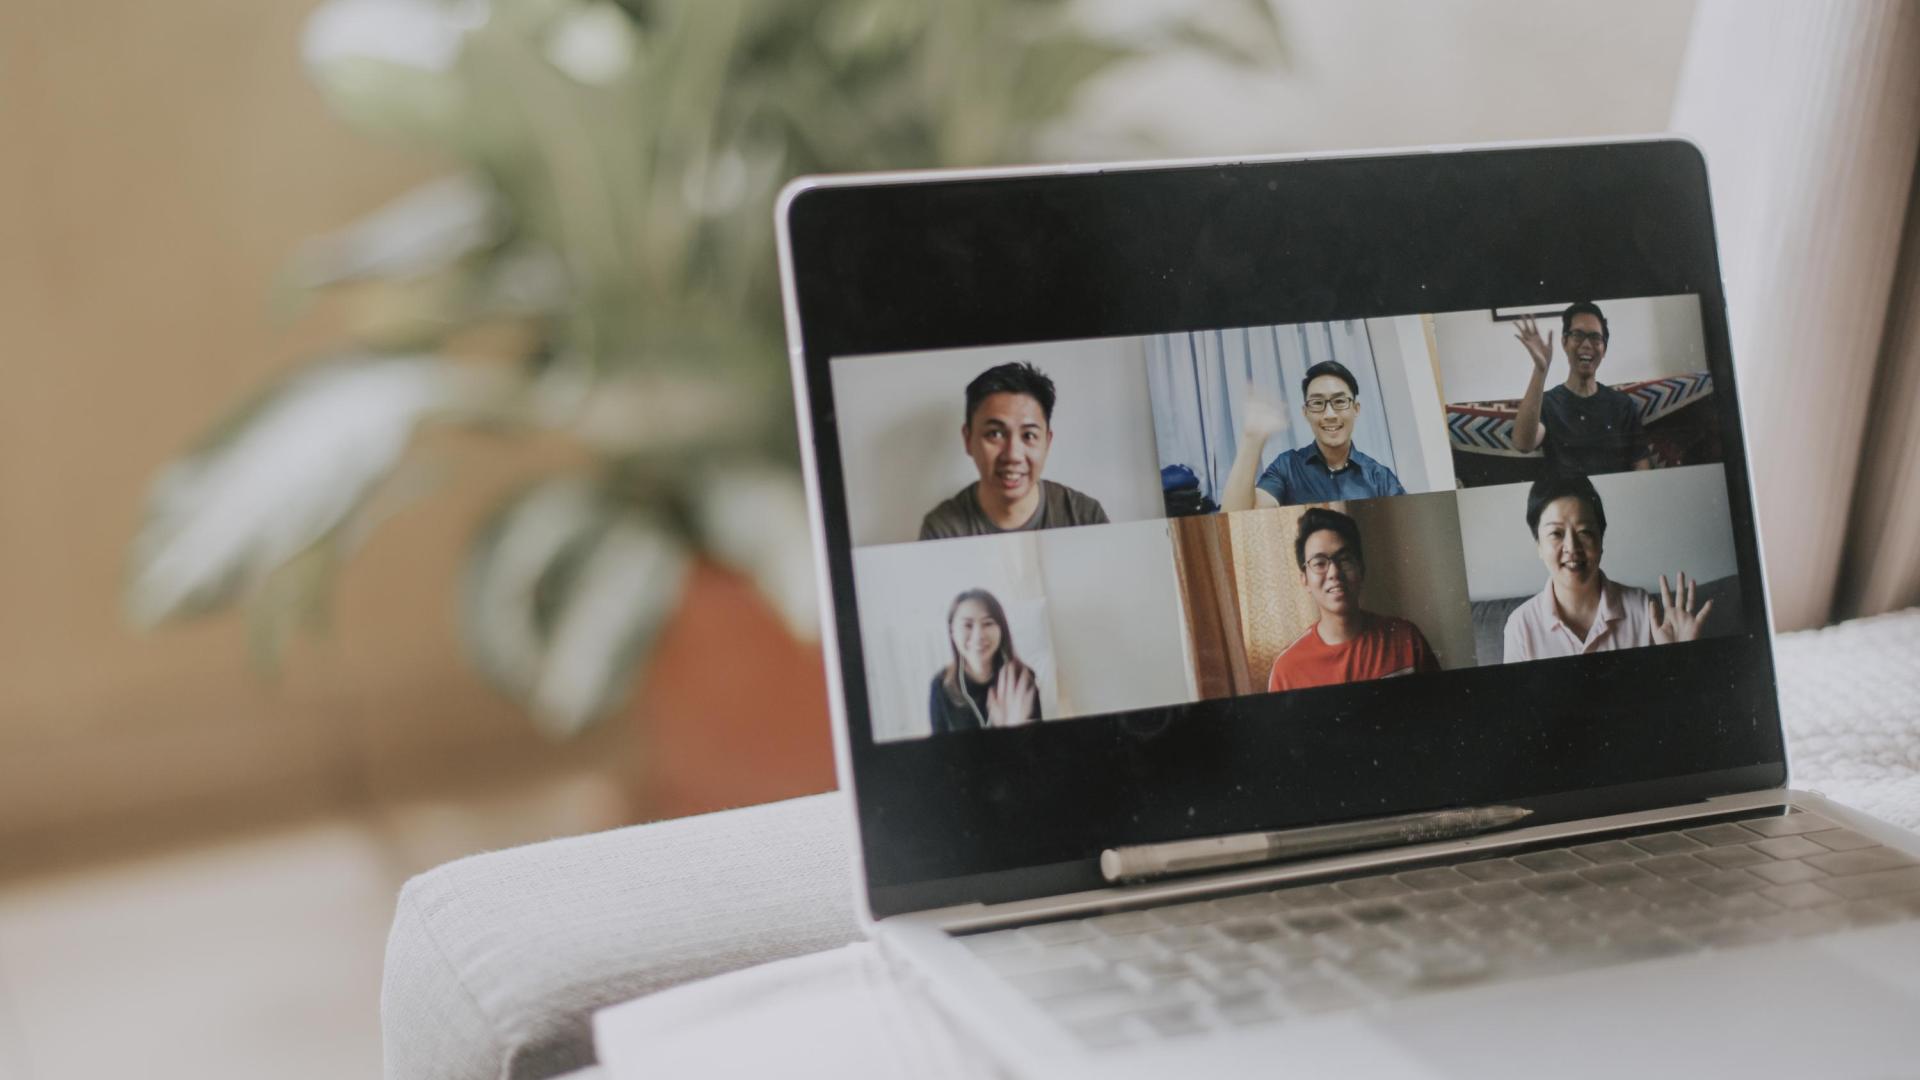 Photo of a laptop screen showing several students on a video chat session